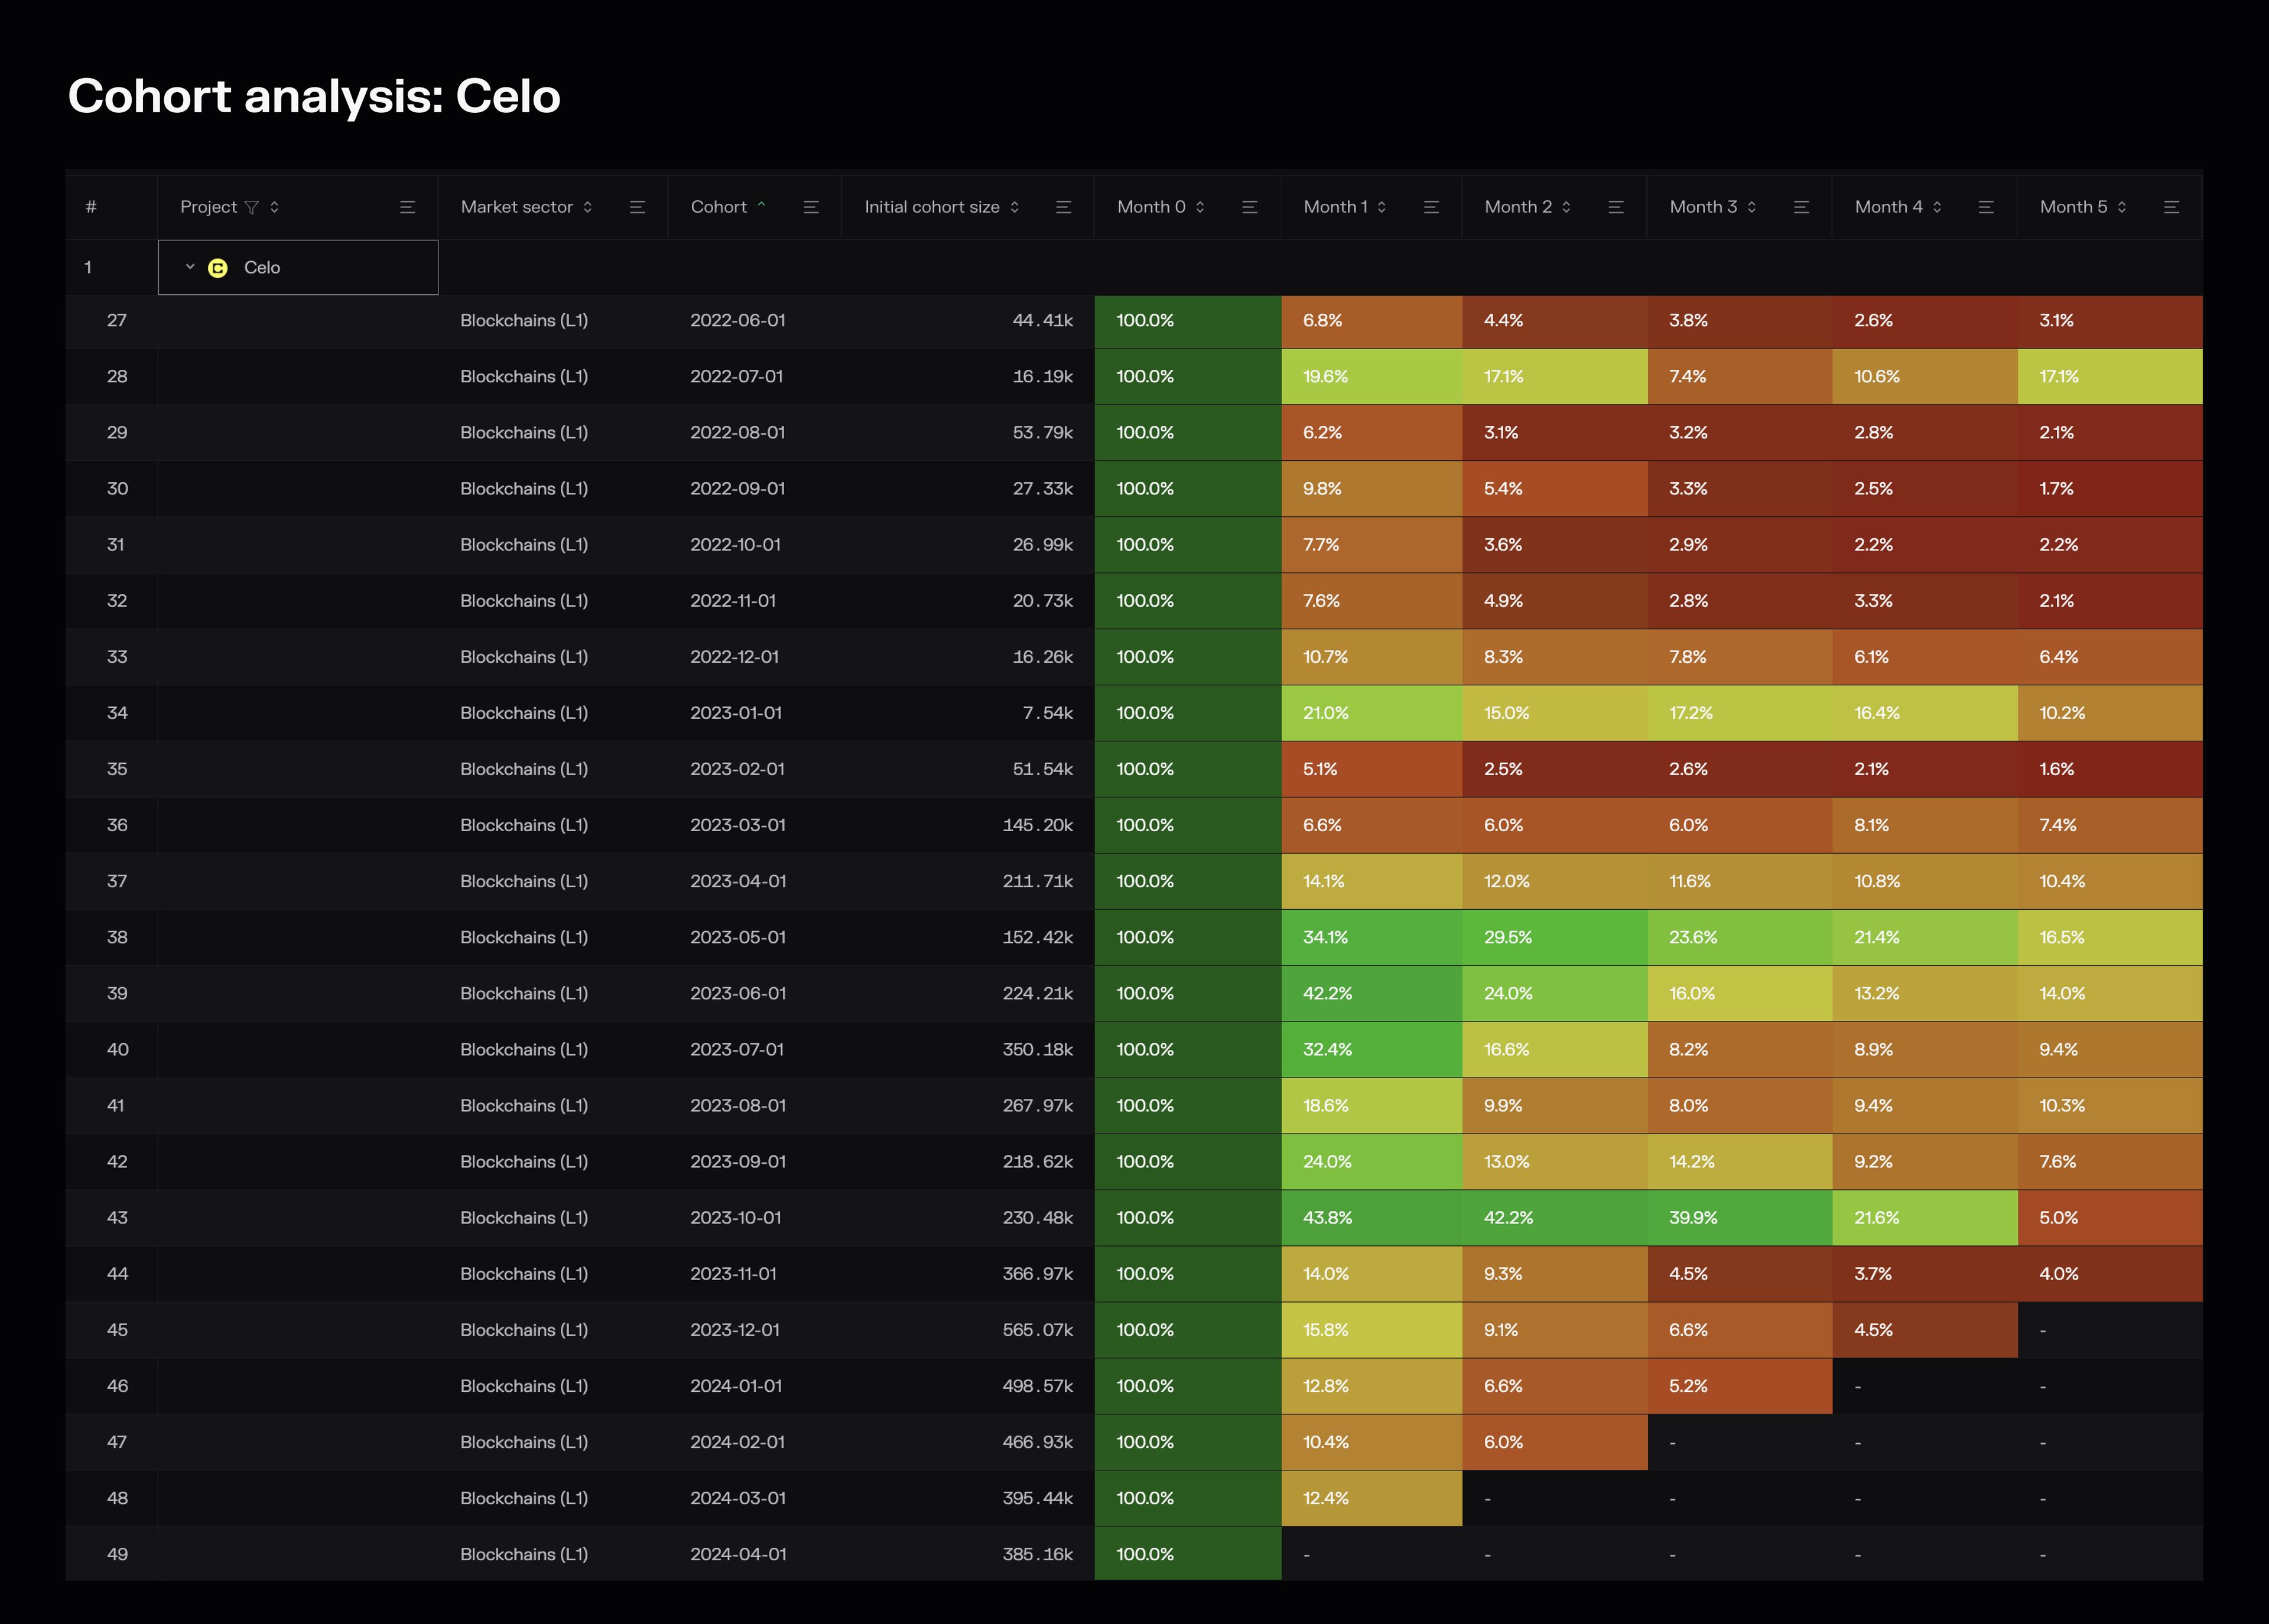 Cohort analysis (retention rates) of monthly active users on Celo.